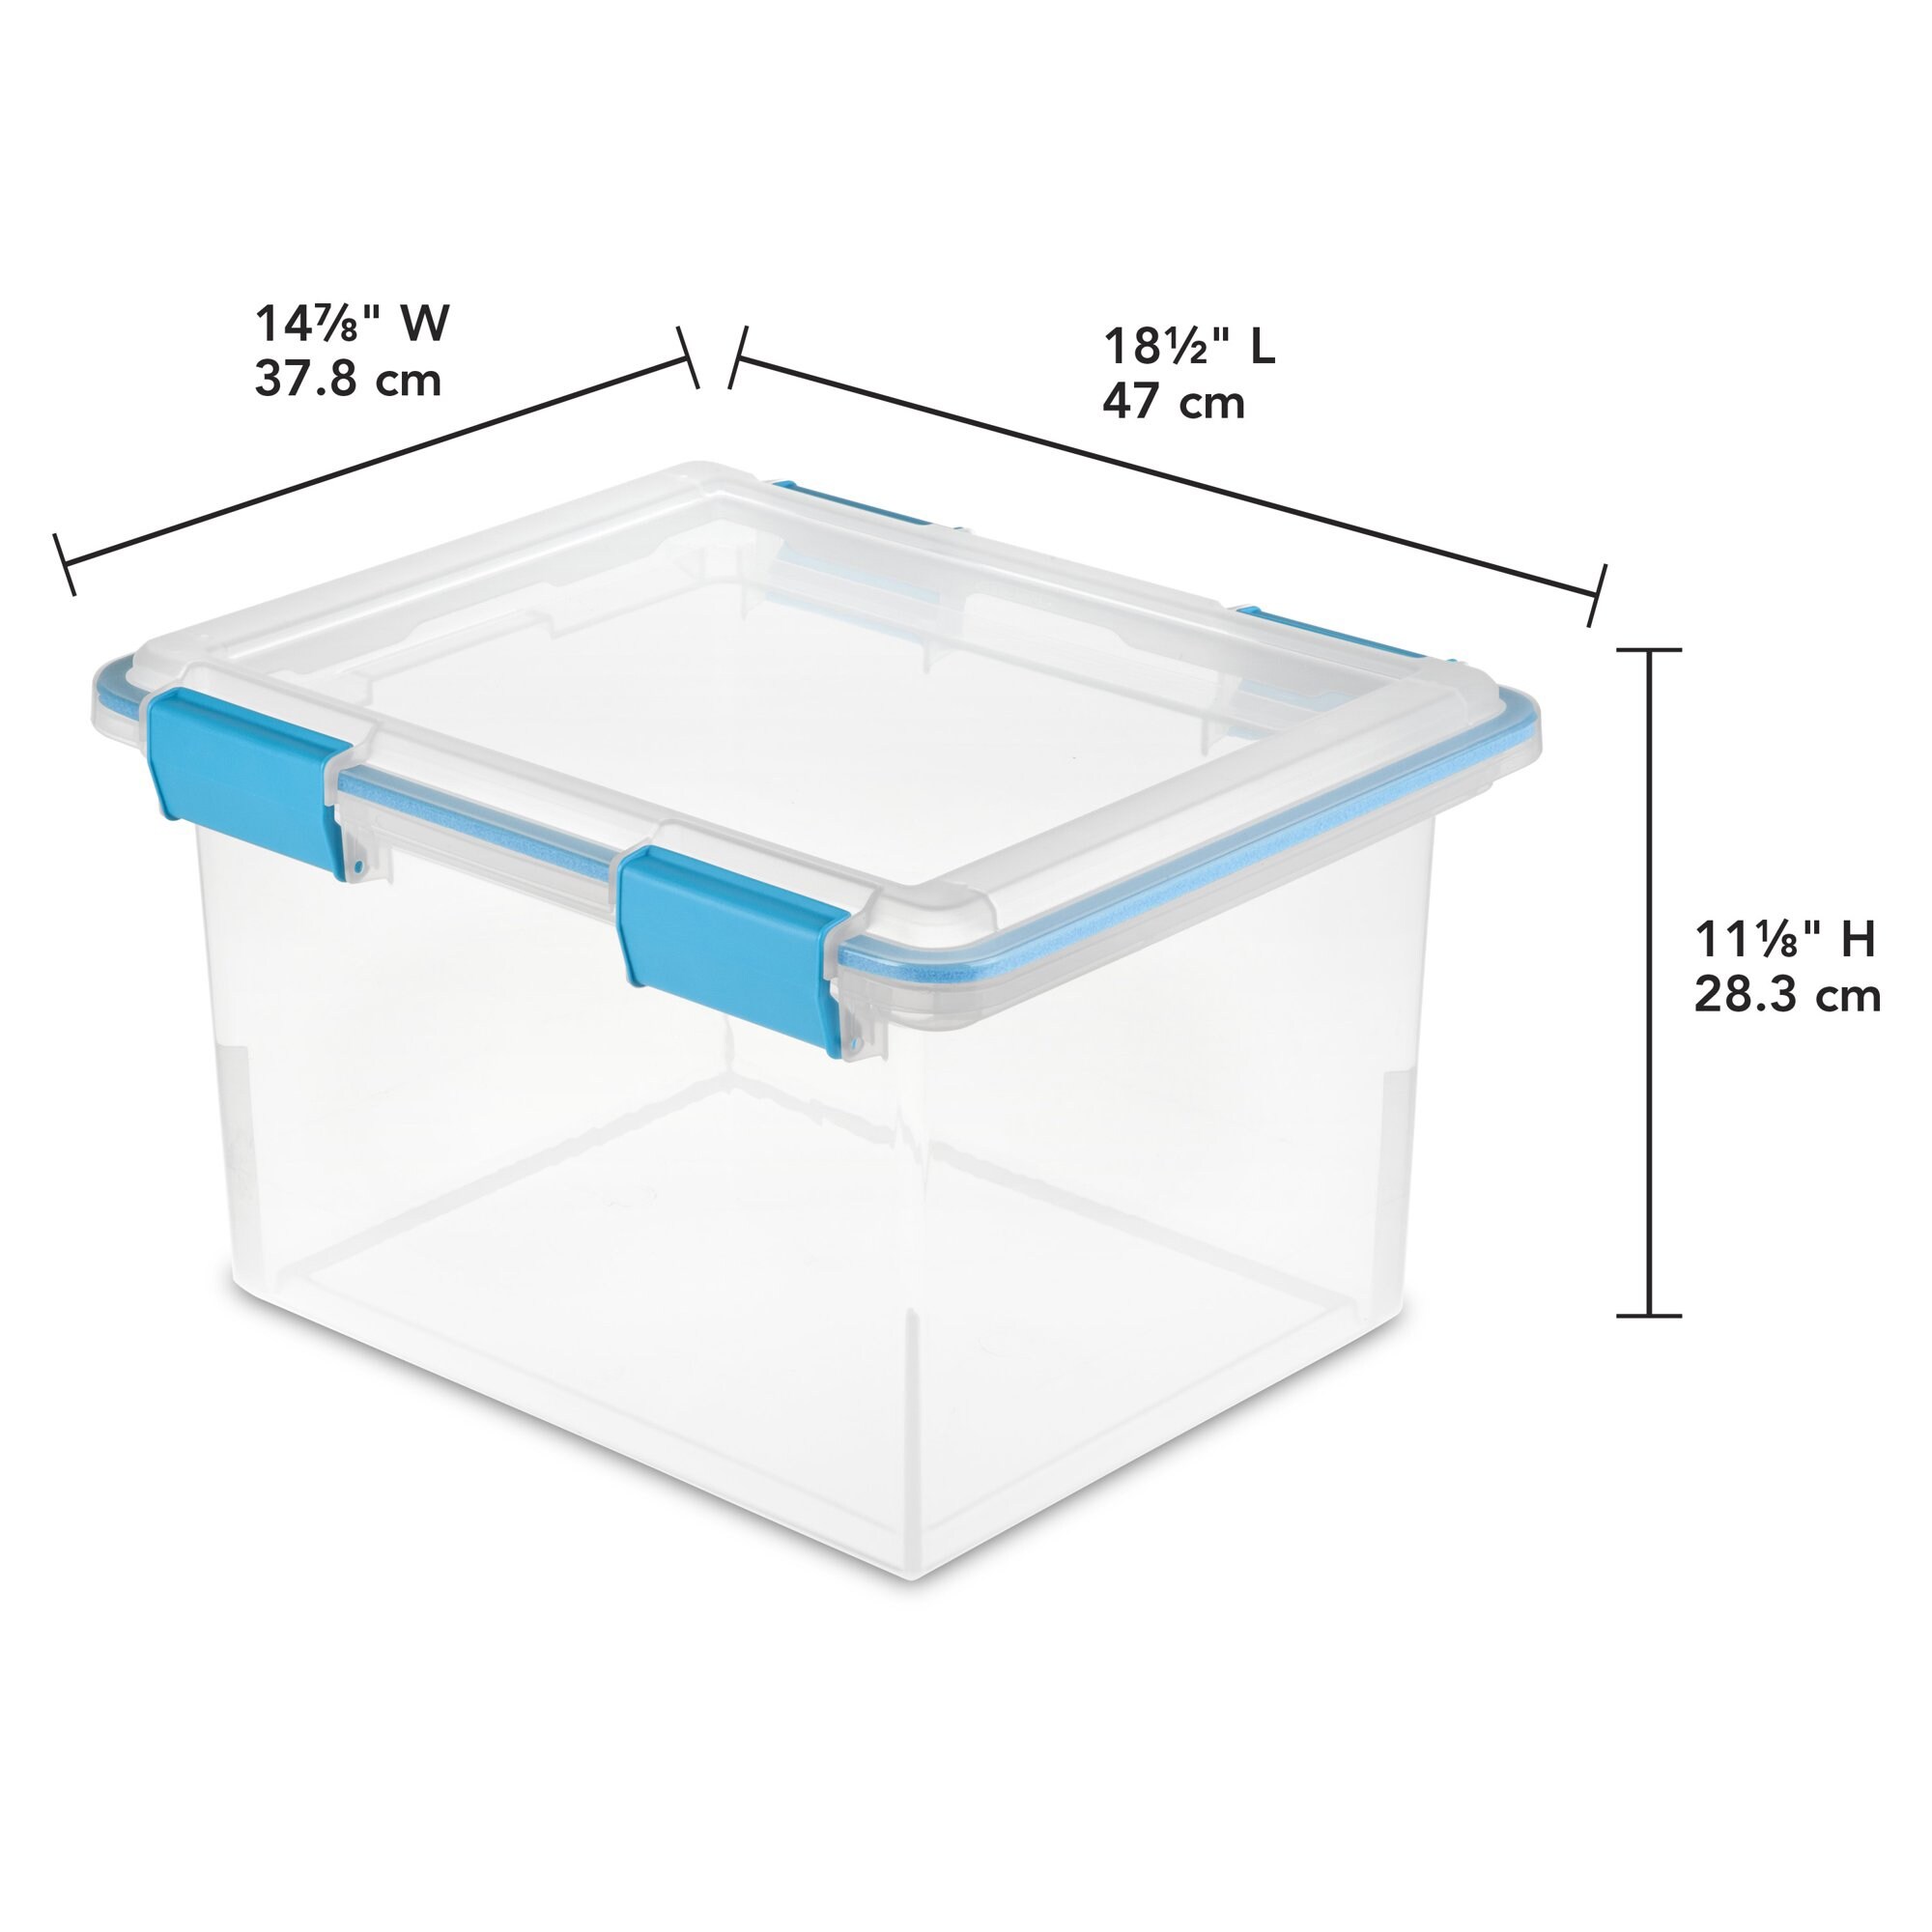 https://ak1.ostkcdn.com/images/products/is/images/direct/b48c5b409dfb389b80ceb348c7f7e8de5a008044/Sterilite-Large-32-Qt-Home-Storage-Container-Tote-with-Latching-Lids%2C-%284-Pack%29.jpg